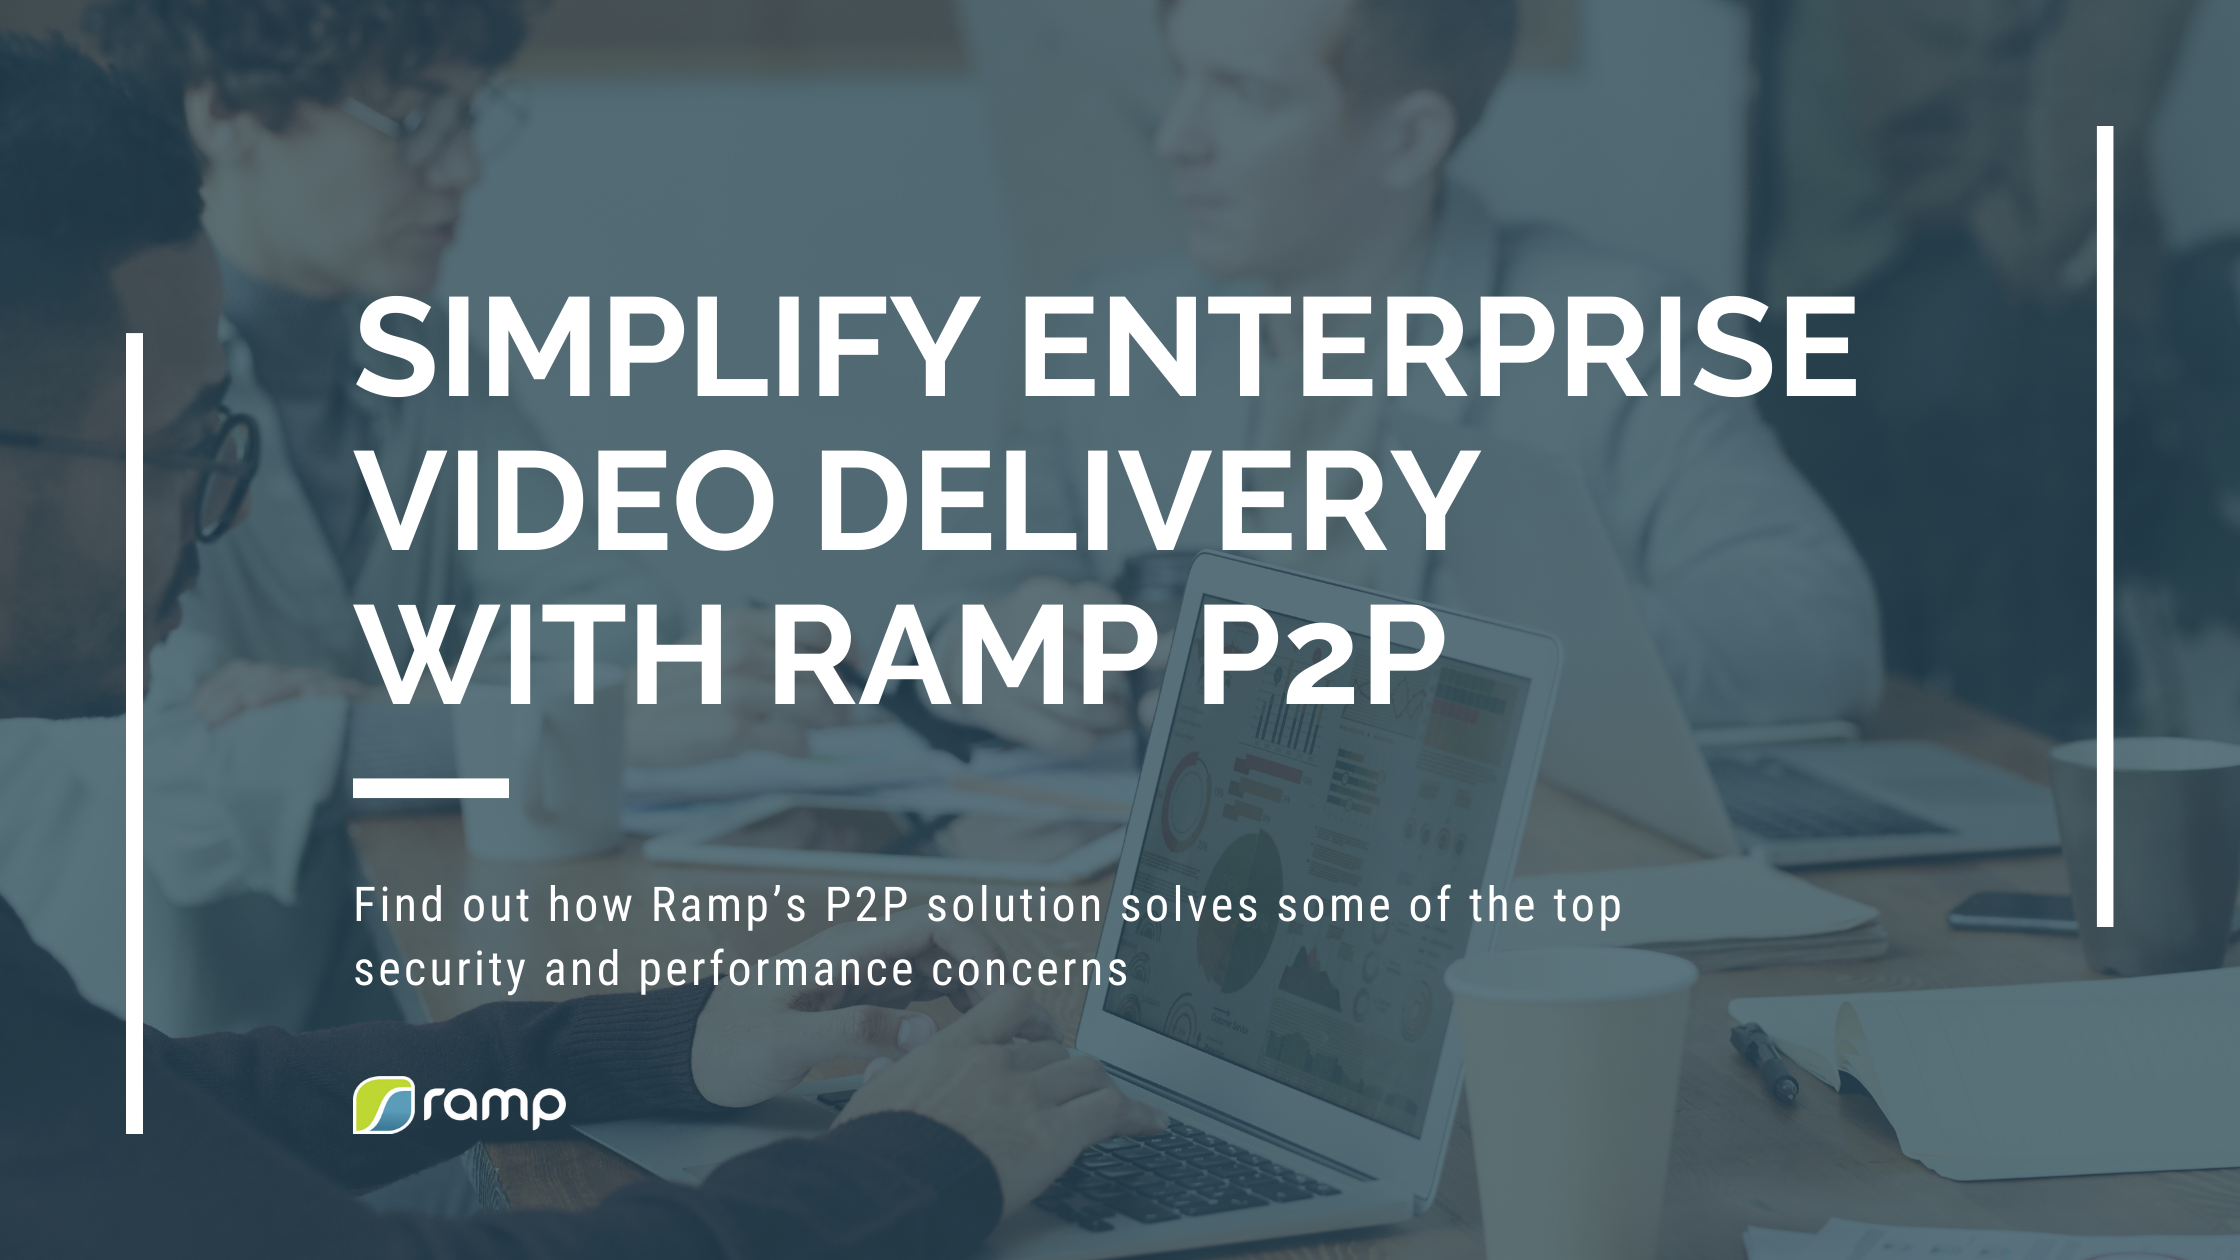 Simplify Enterprise Video Delivery with Ramp P2P